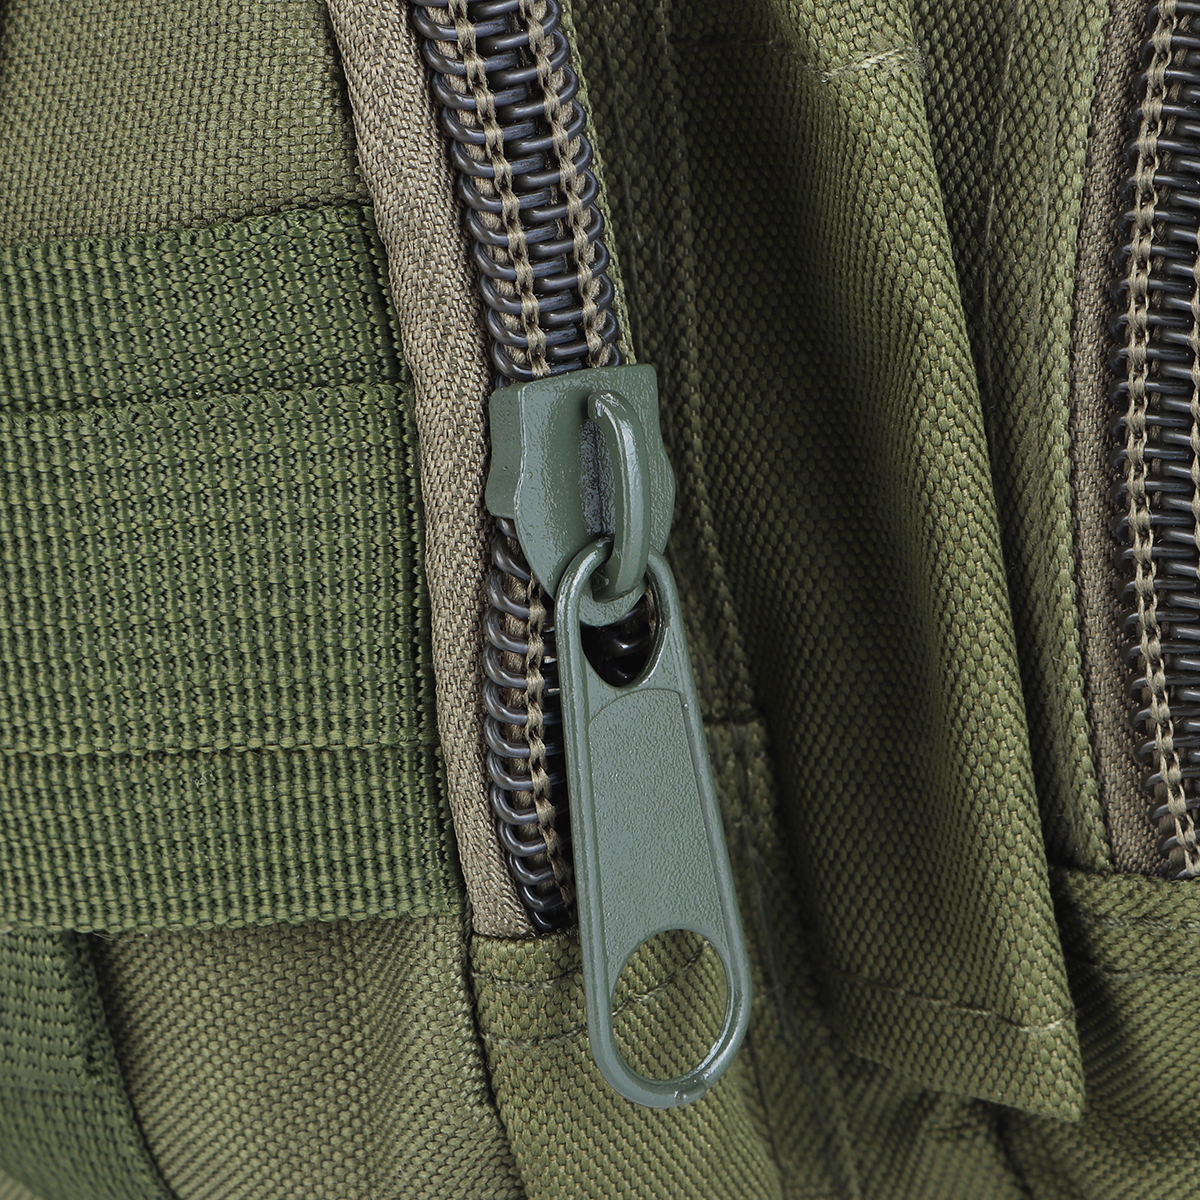 Multifunctional-Outdoor-Sports-Hiking-with-Zippers-Nylon-Oxford-Cloth-Tactical-Shoulder-Bag-Waist-Pa-1825563-22